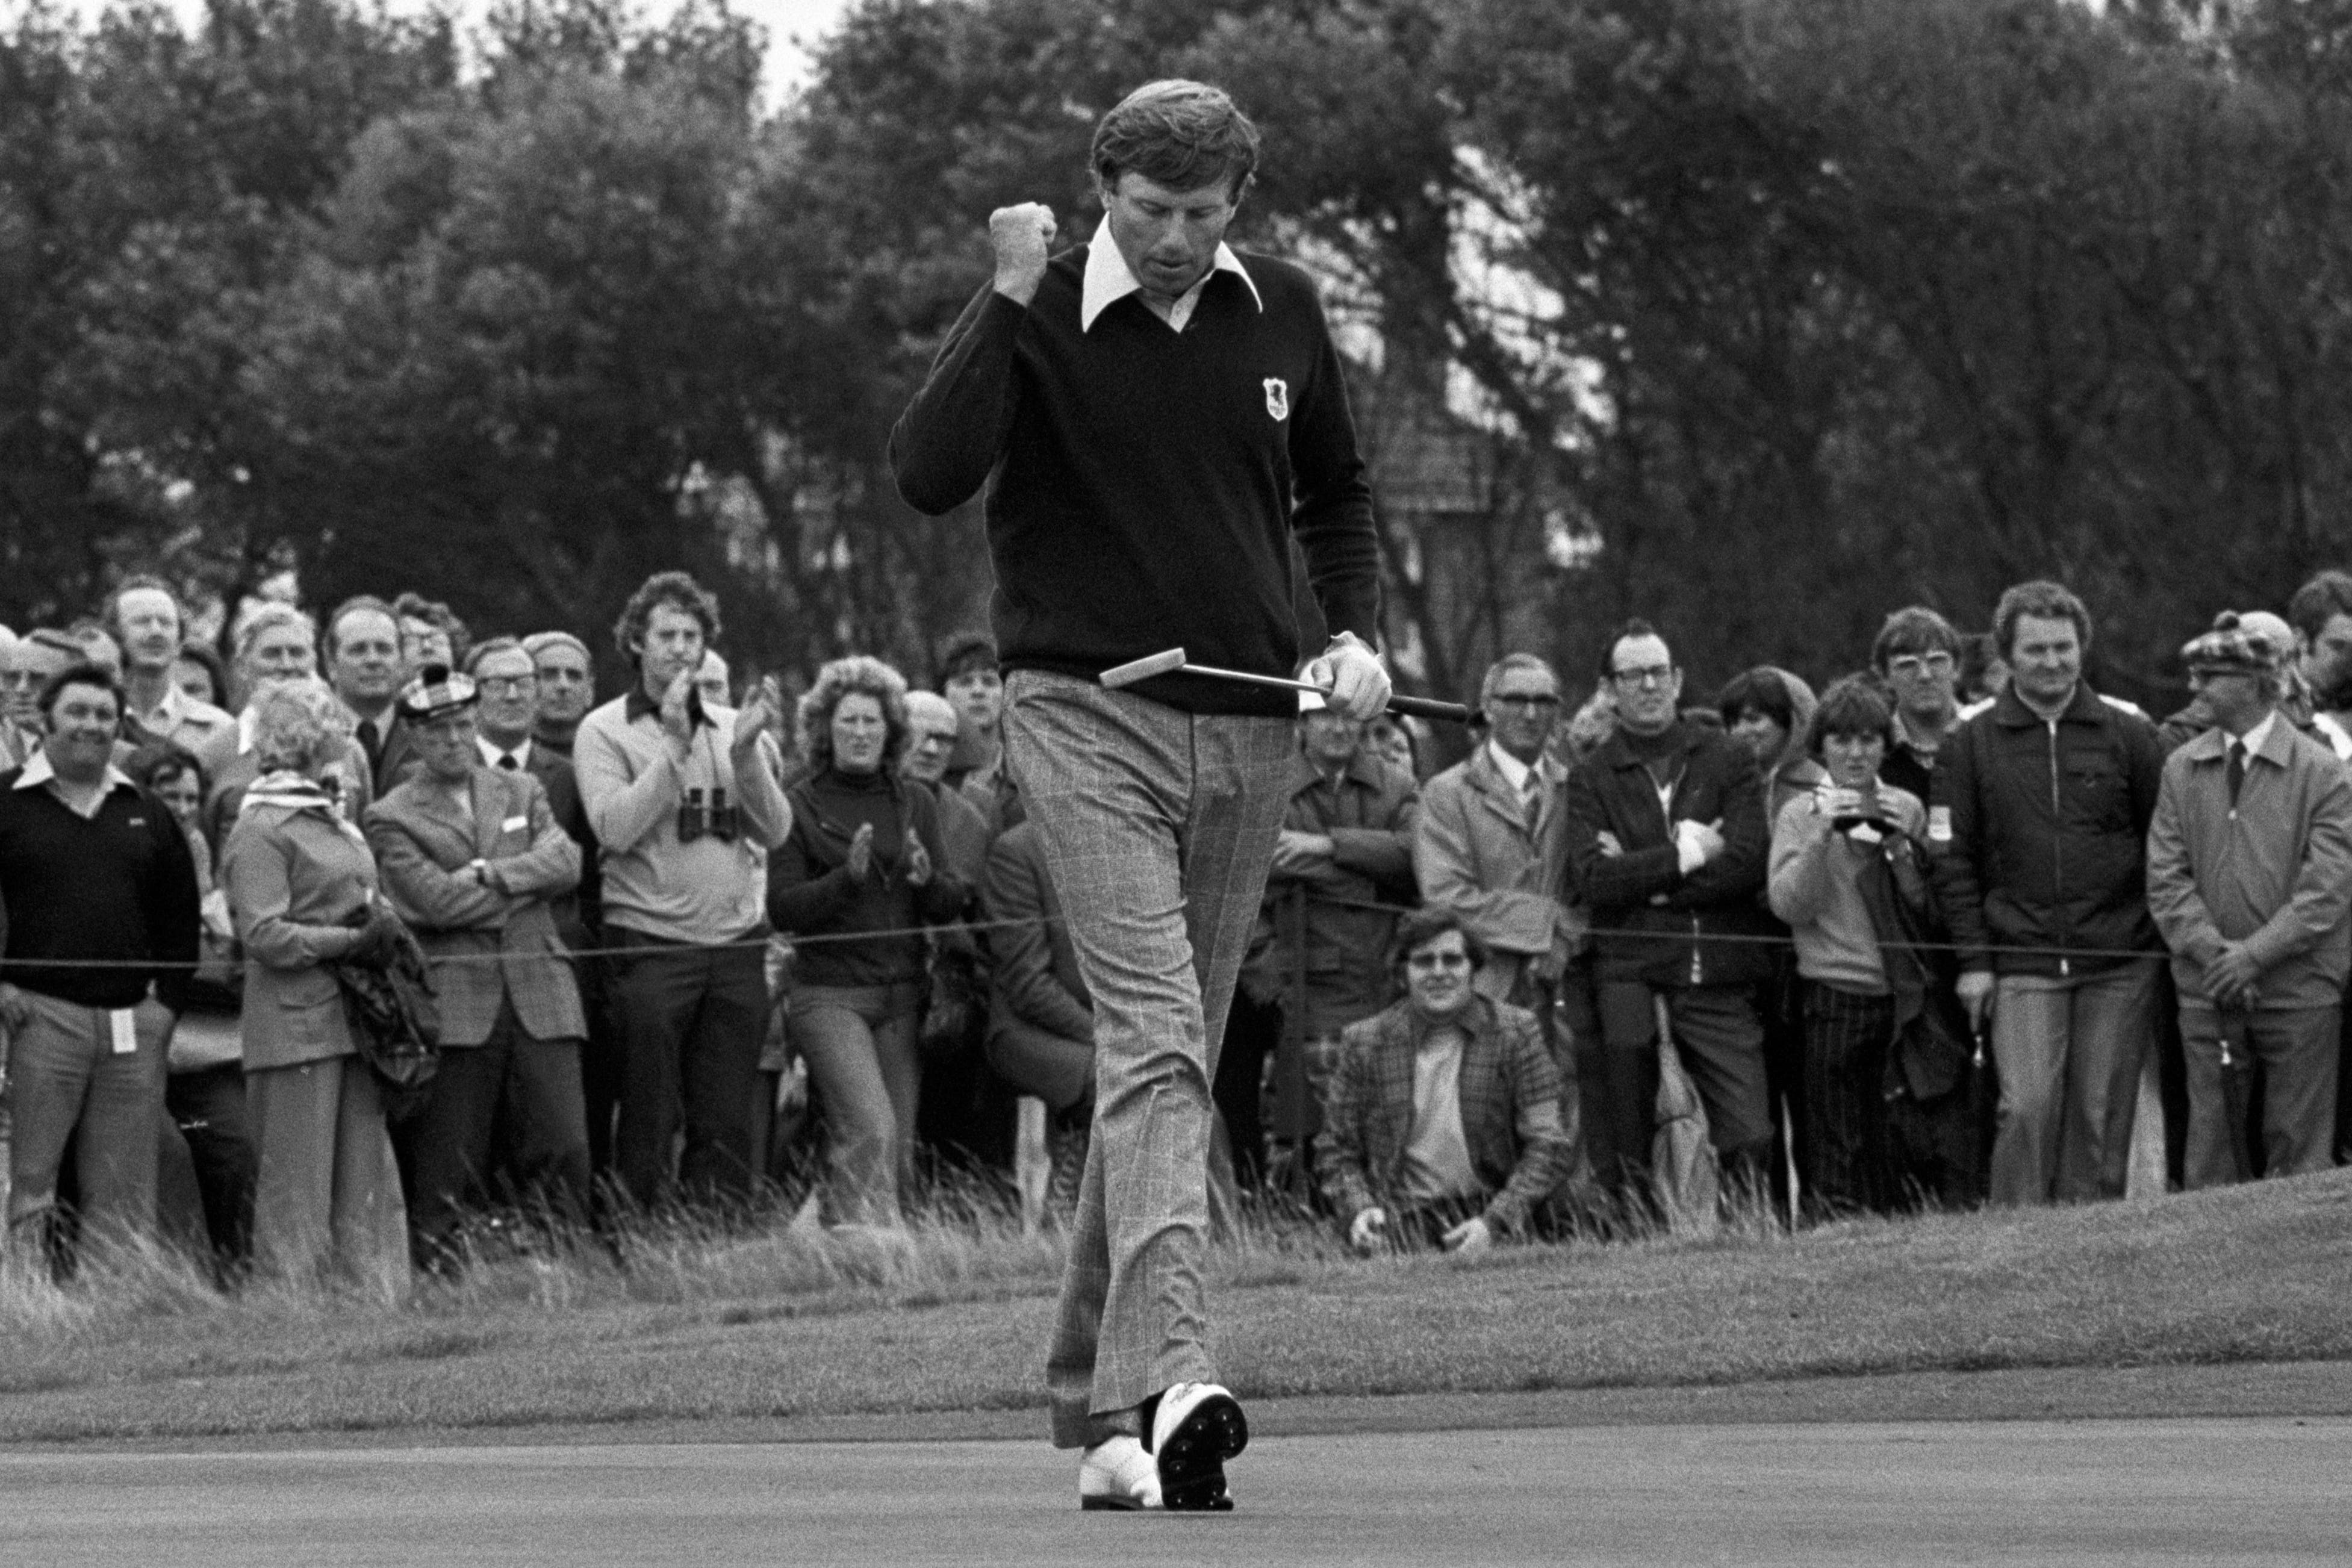 Oosterhuis was a much-loved figure in the golfing world